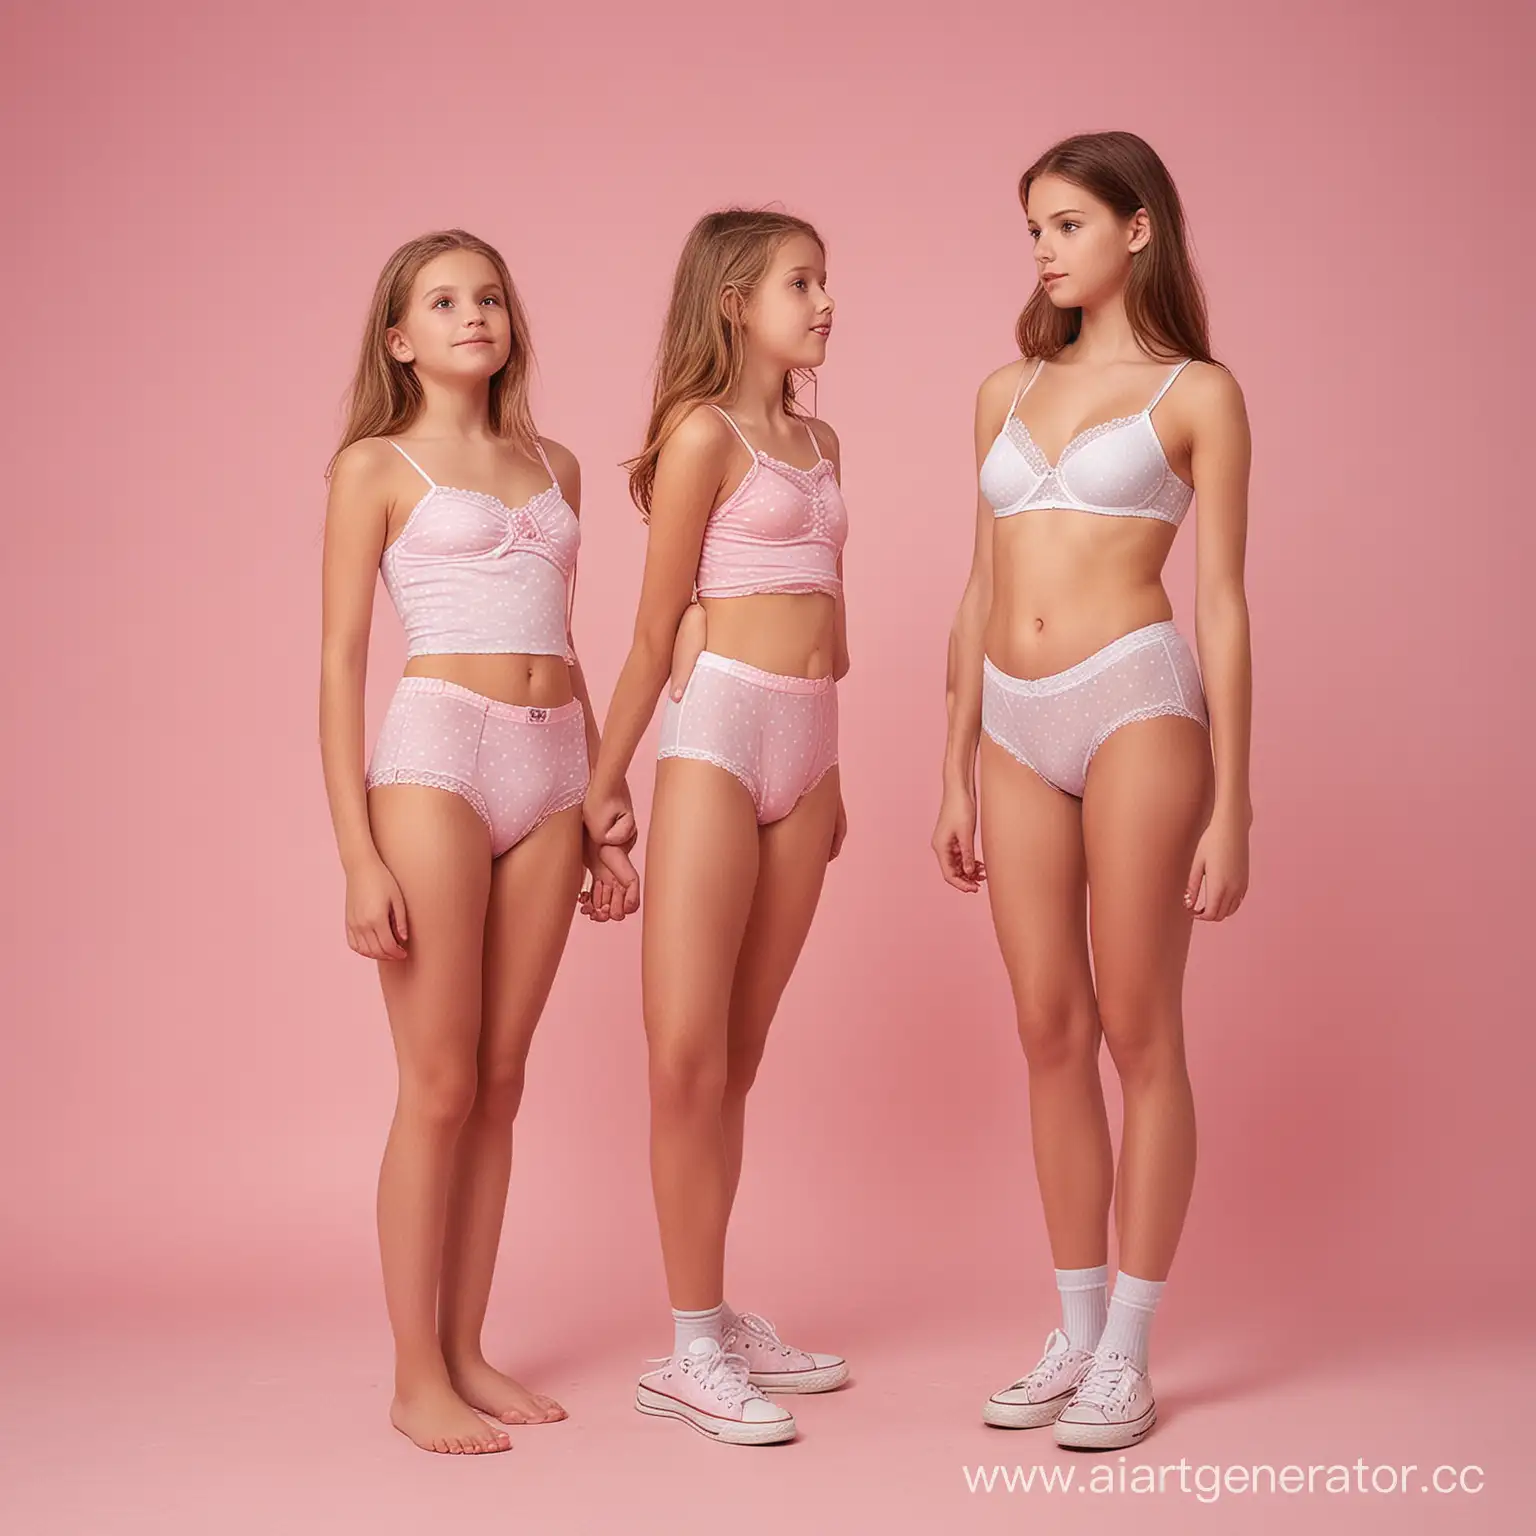 very small old man, a little old man looks up to taller giant 12yo white girl towering stature cute innocent face buxom leggy underwear model slim waist cute innocent face, very tall 12yo girl overlooks a little old man pink background